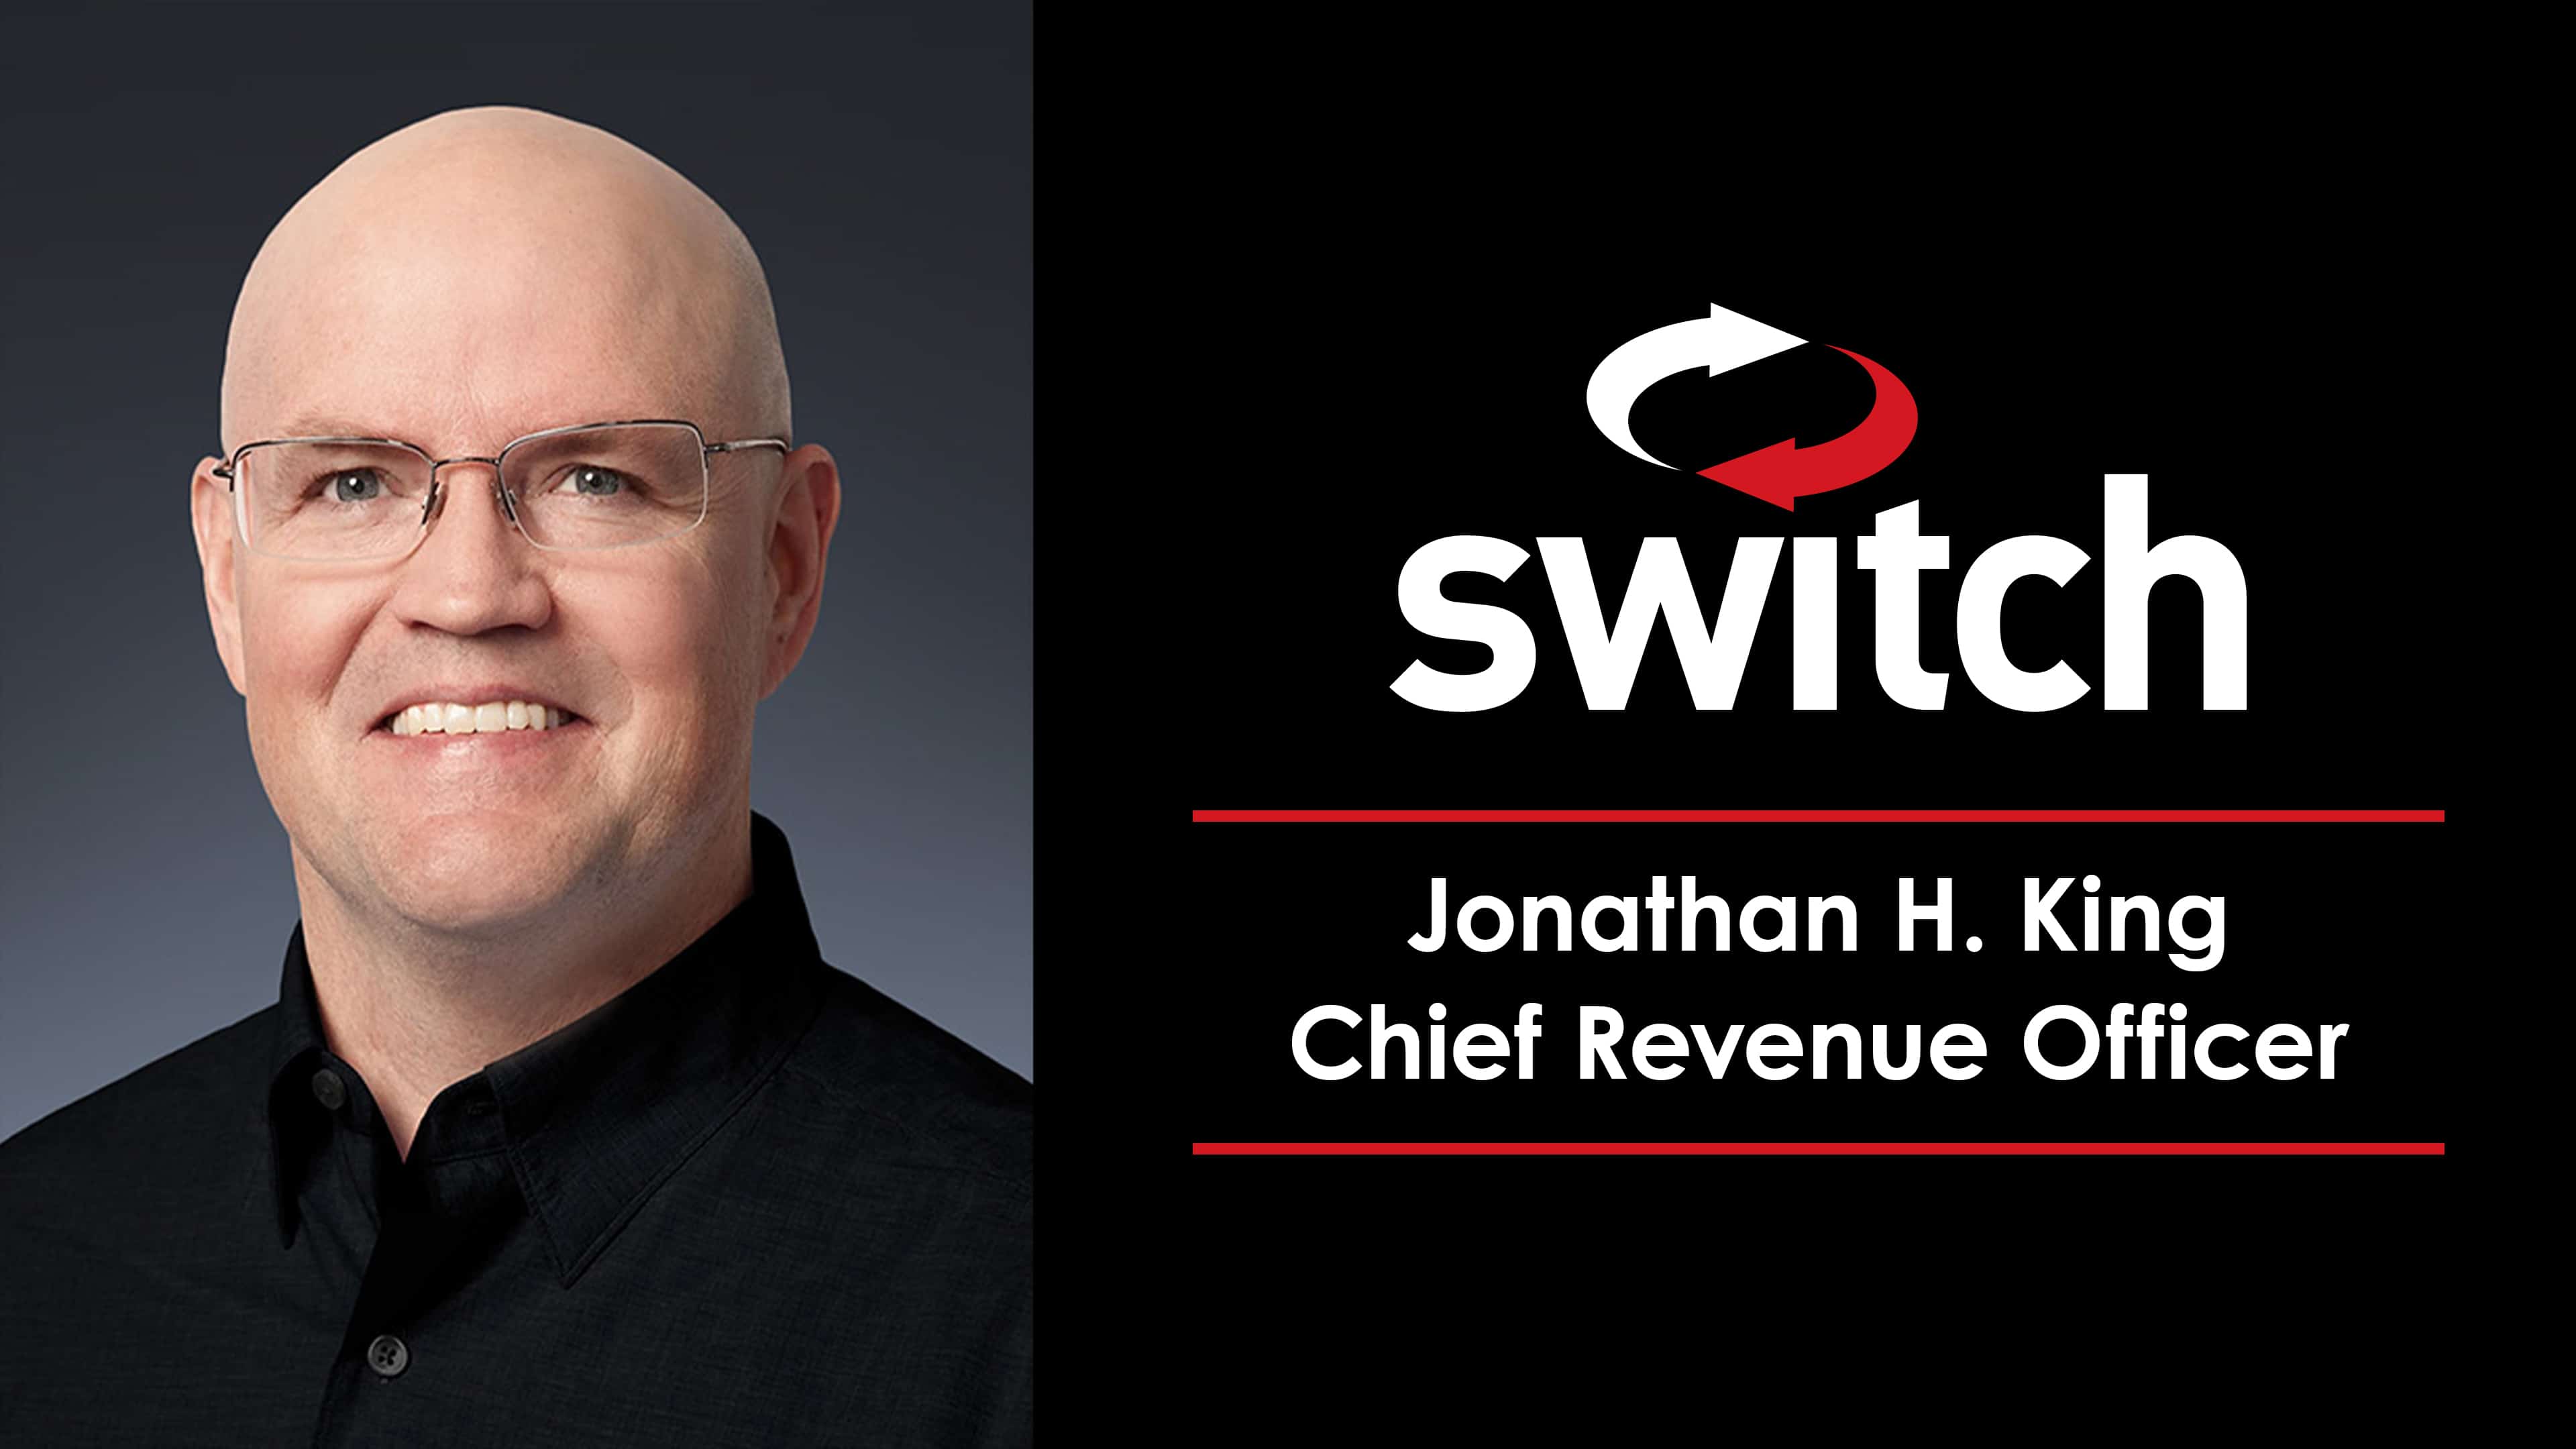 Switch Adds Technology Leader Jonathan H. King as Chief Revenue Officer